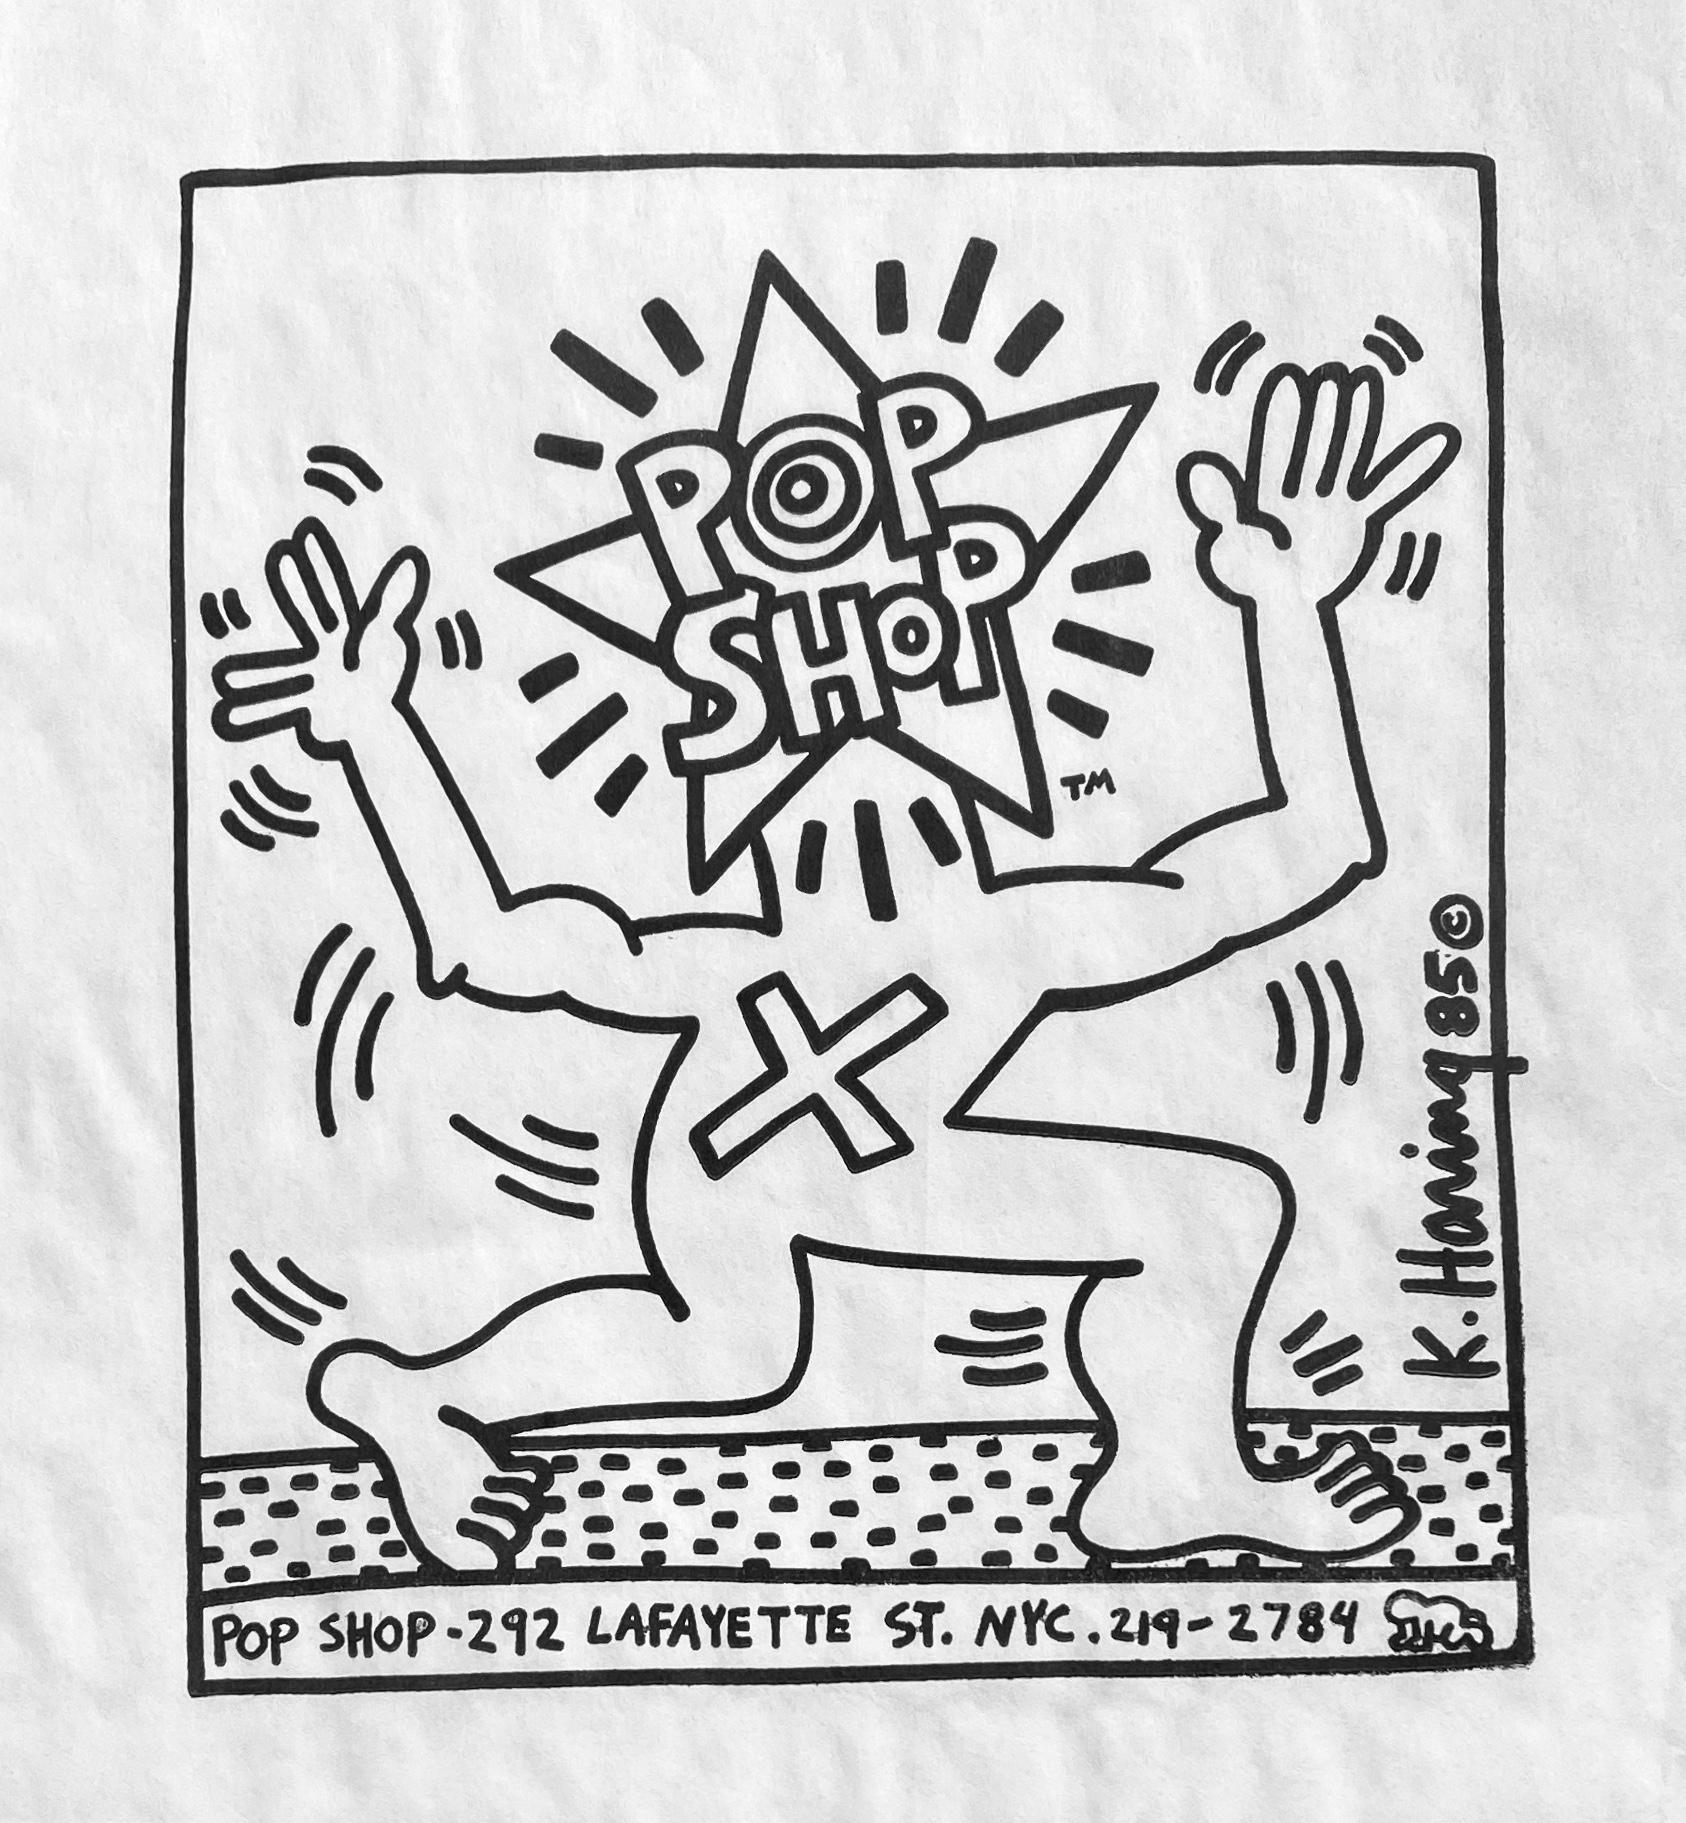 Vintage Keith Haring 1980s Pop Shop bag off-set illustrated by Haring. A classic Keith Haring Pop Shop collectible that is well-suited for framing. 

Medium: Offset lithograph on whiter paper bag. c.1986.Approximately 8.5 x 11 inches. 

Good to very